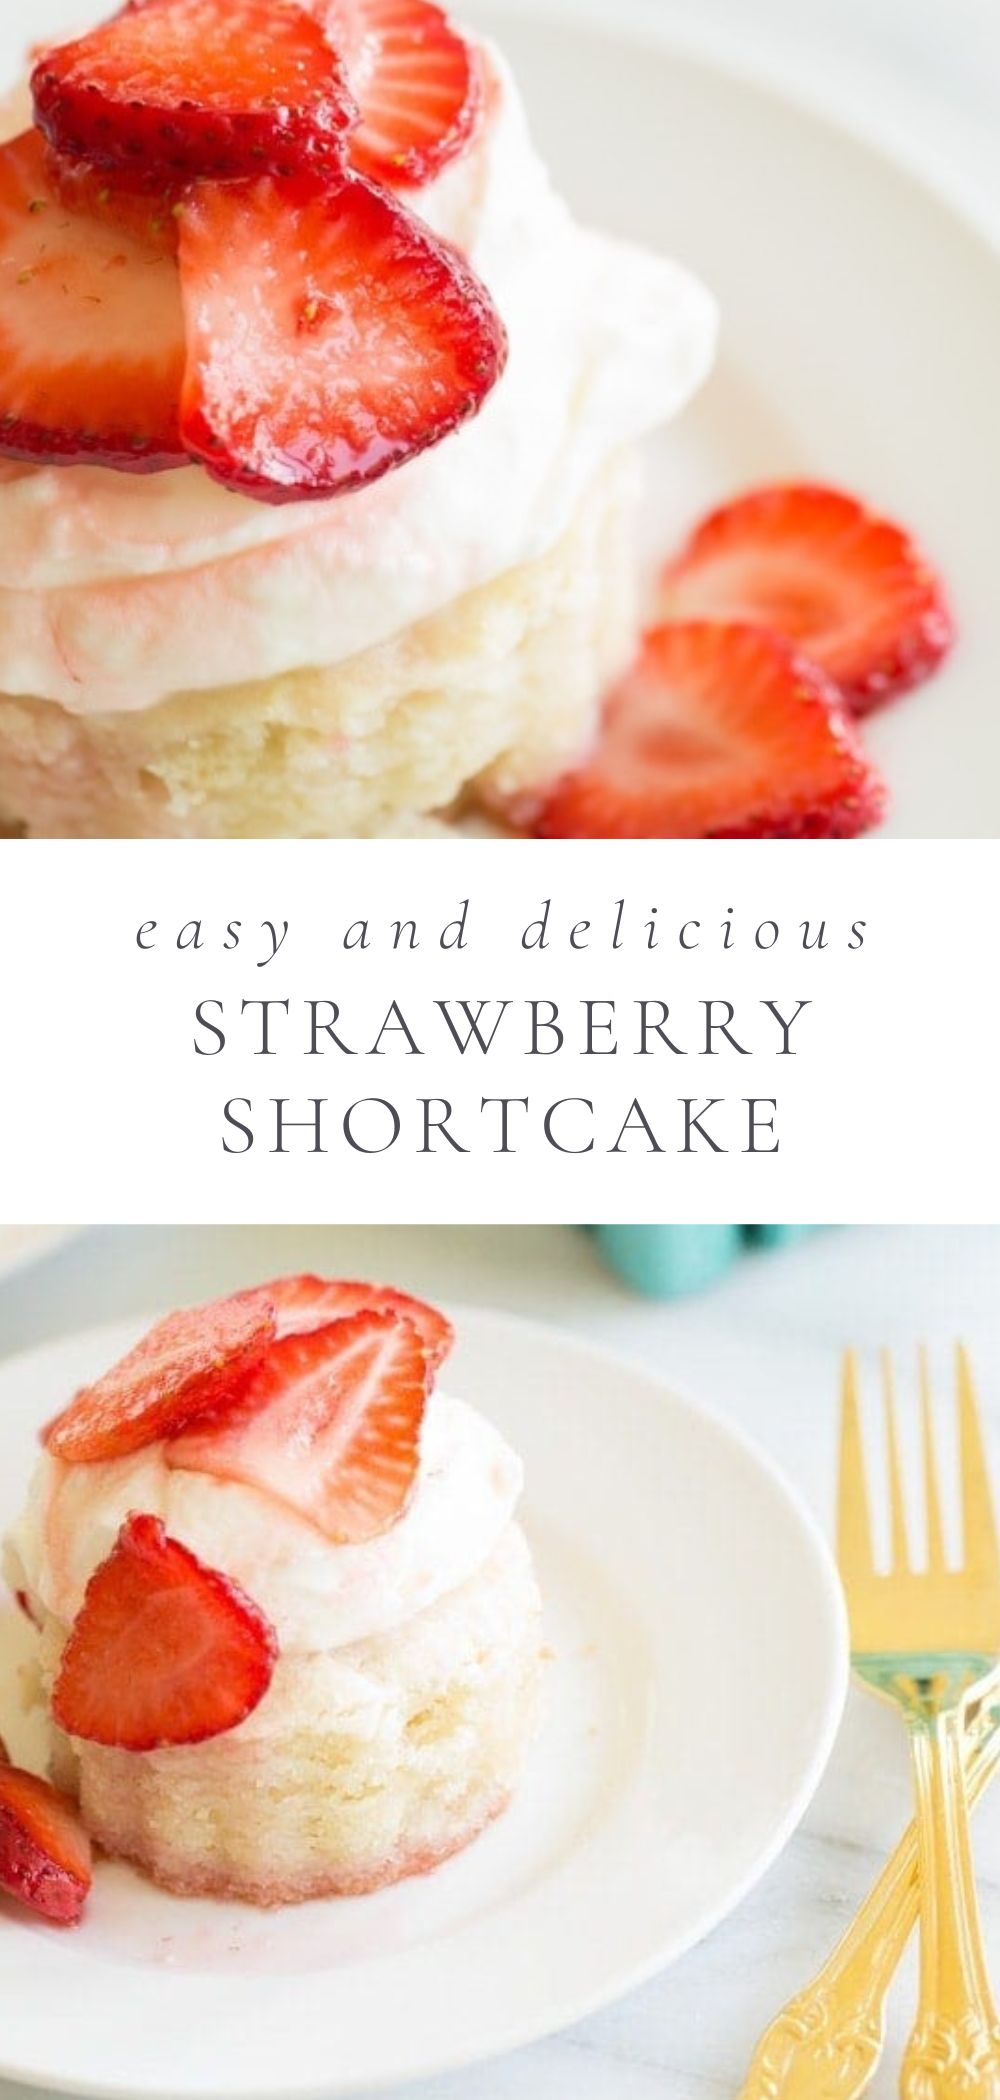 two pictures of strawberry shortcake with cream and berries